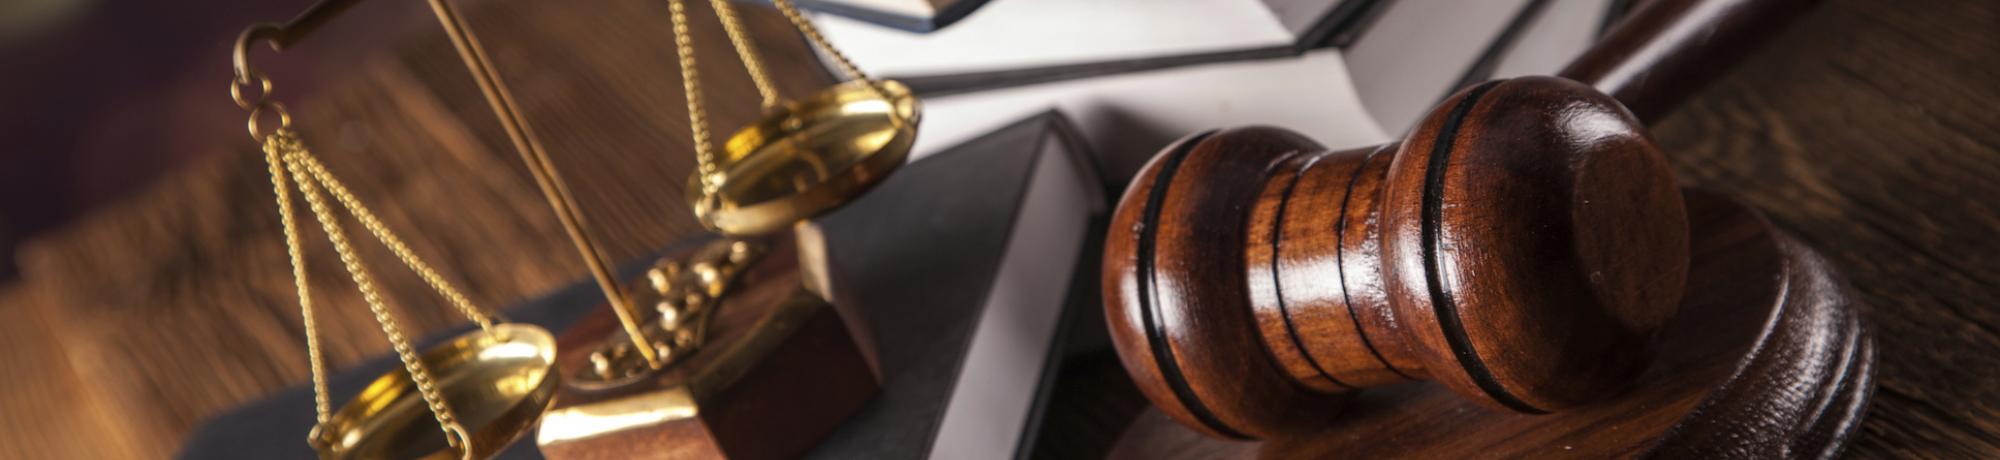 gavel, scales and books on a desk